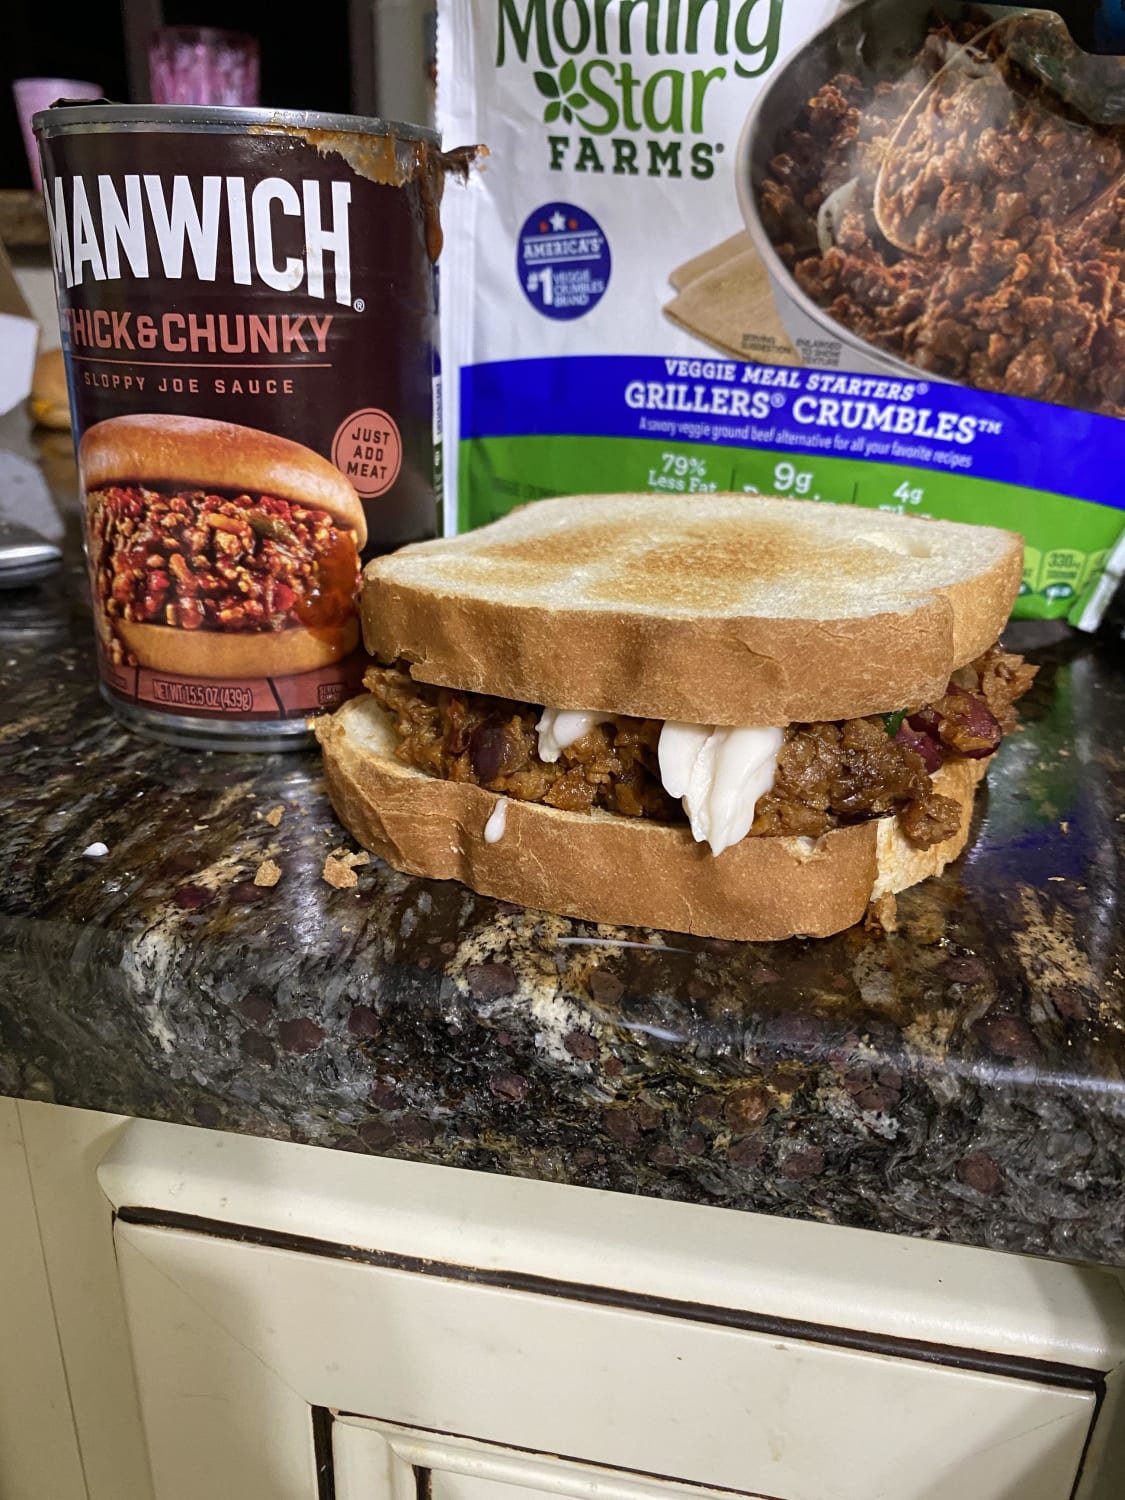 Manwich with onions, tomatoes, spinach, kidney beans and good karma sour cream.